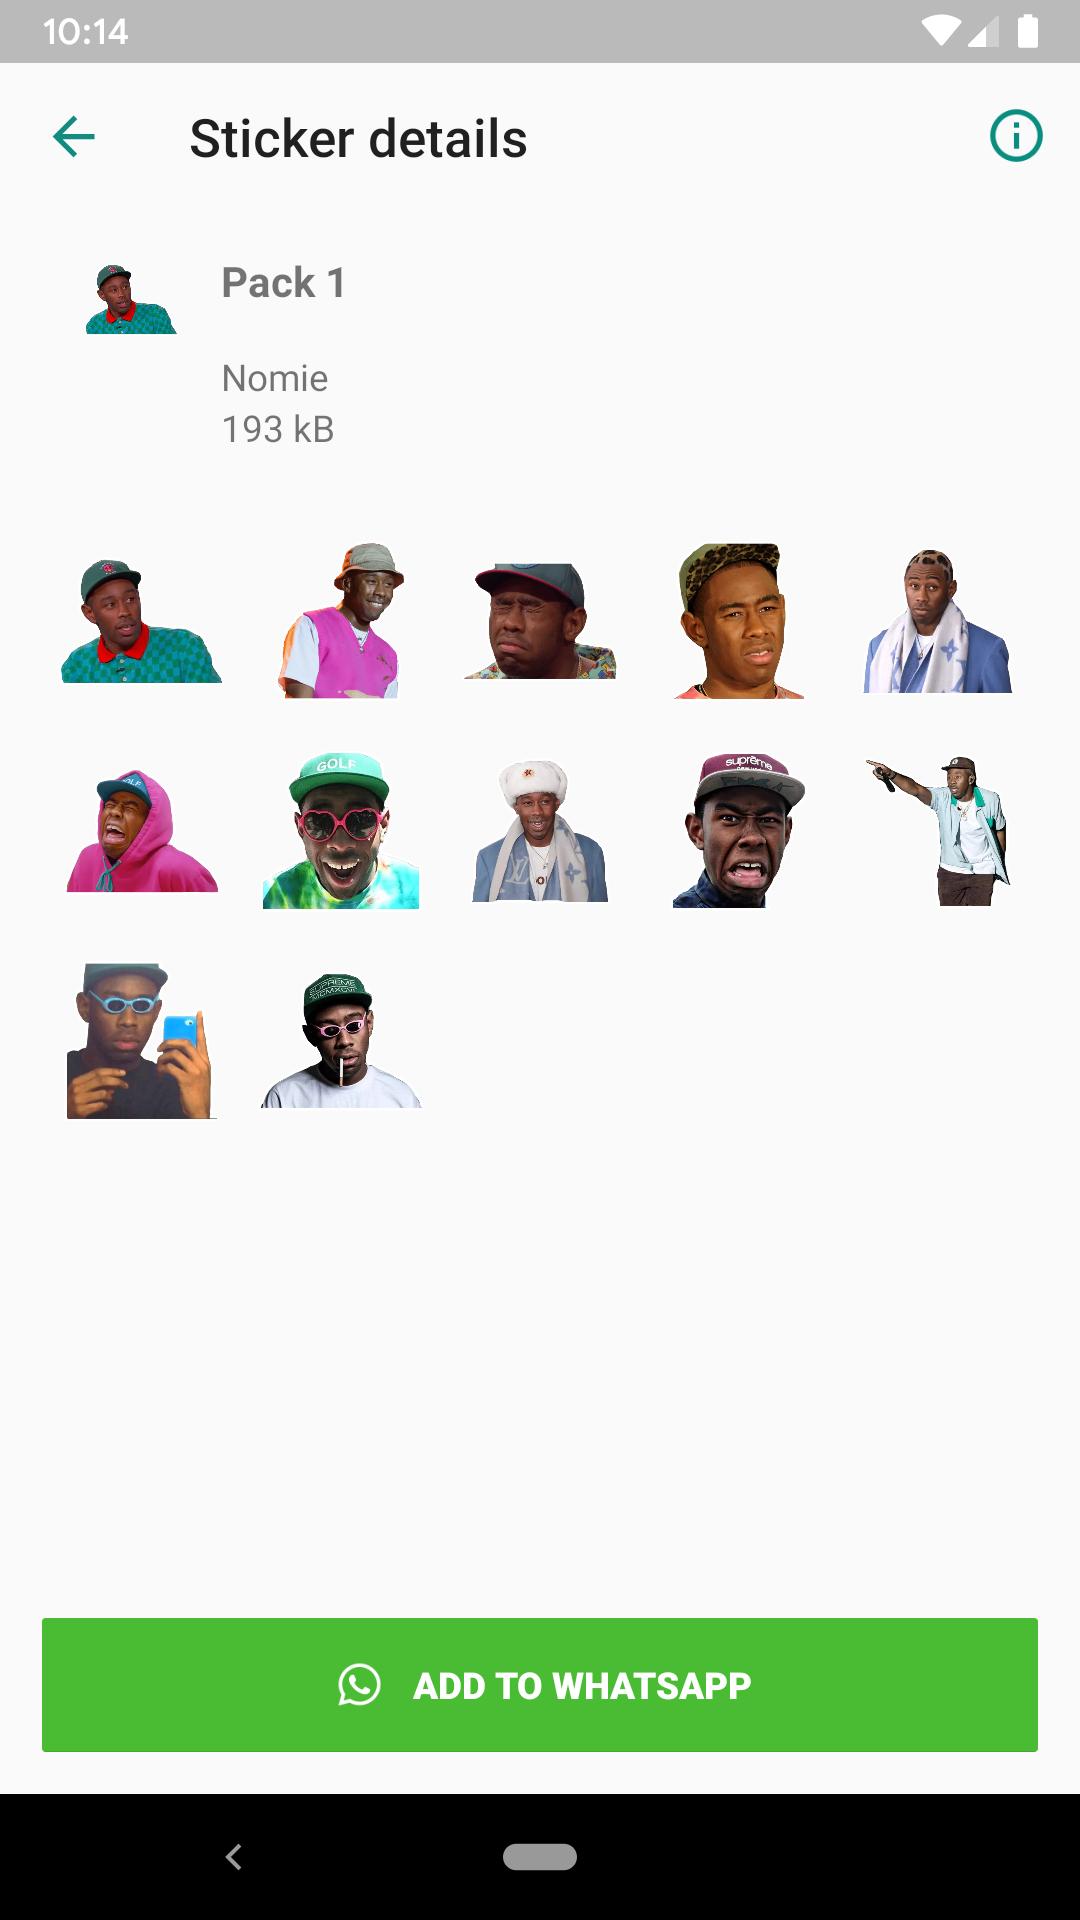 Tyler The Creator Sticker Pack For Android Apk Download